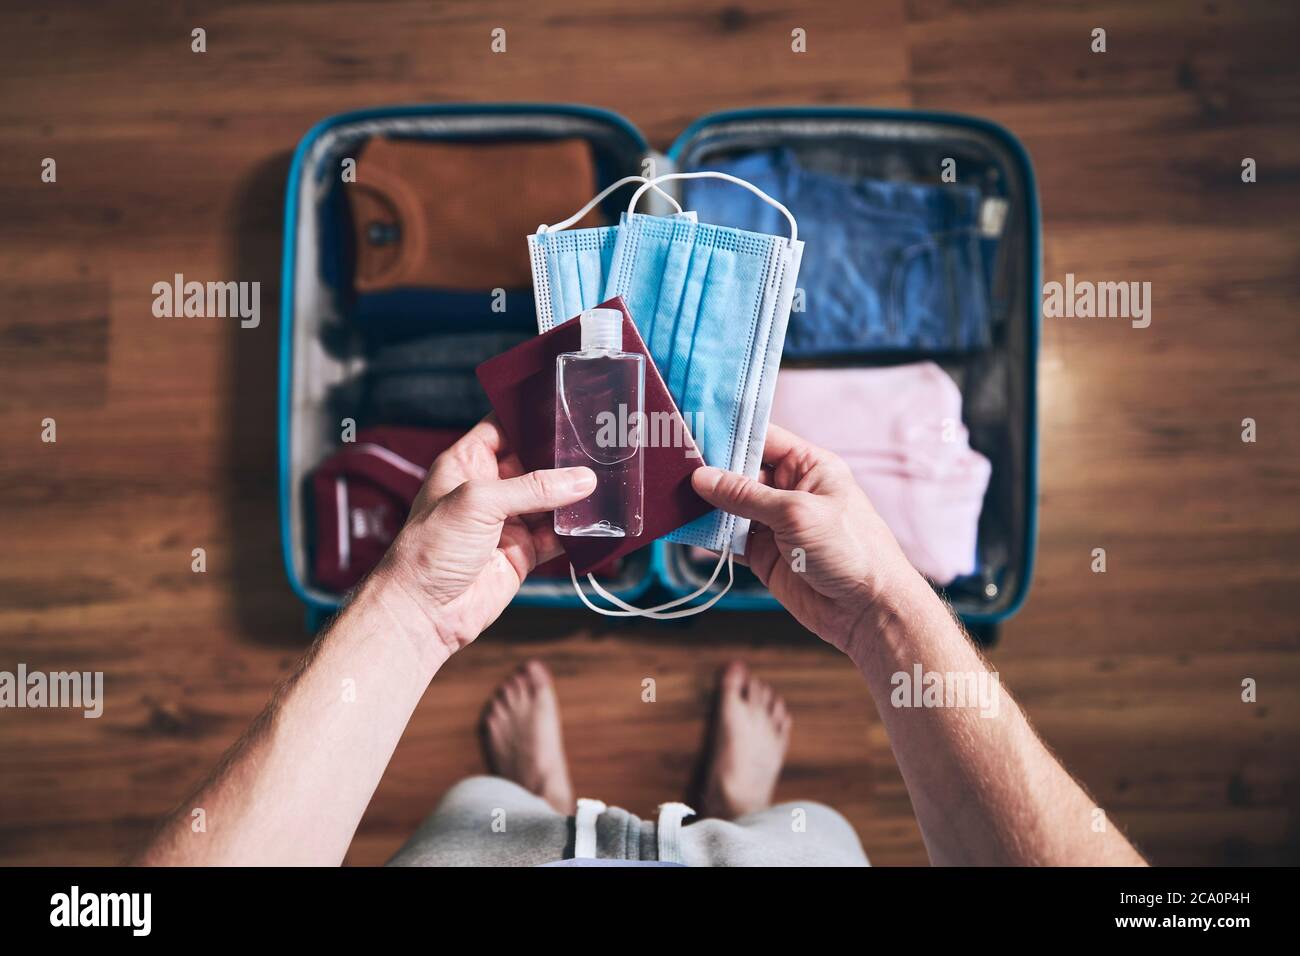 Preparing for travel in new normal. Man packing passport, face masks and hand sanitizer. Themes personal protection and flight rules during coronaviru Stock Photo